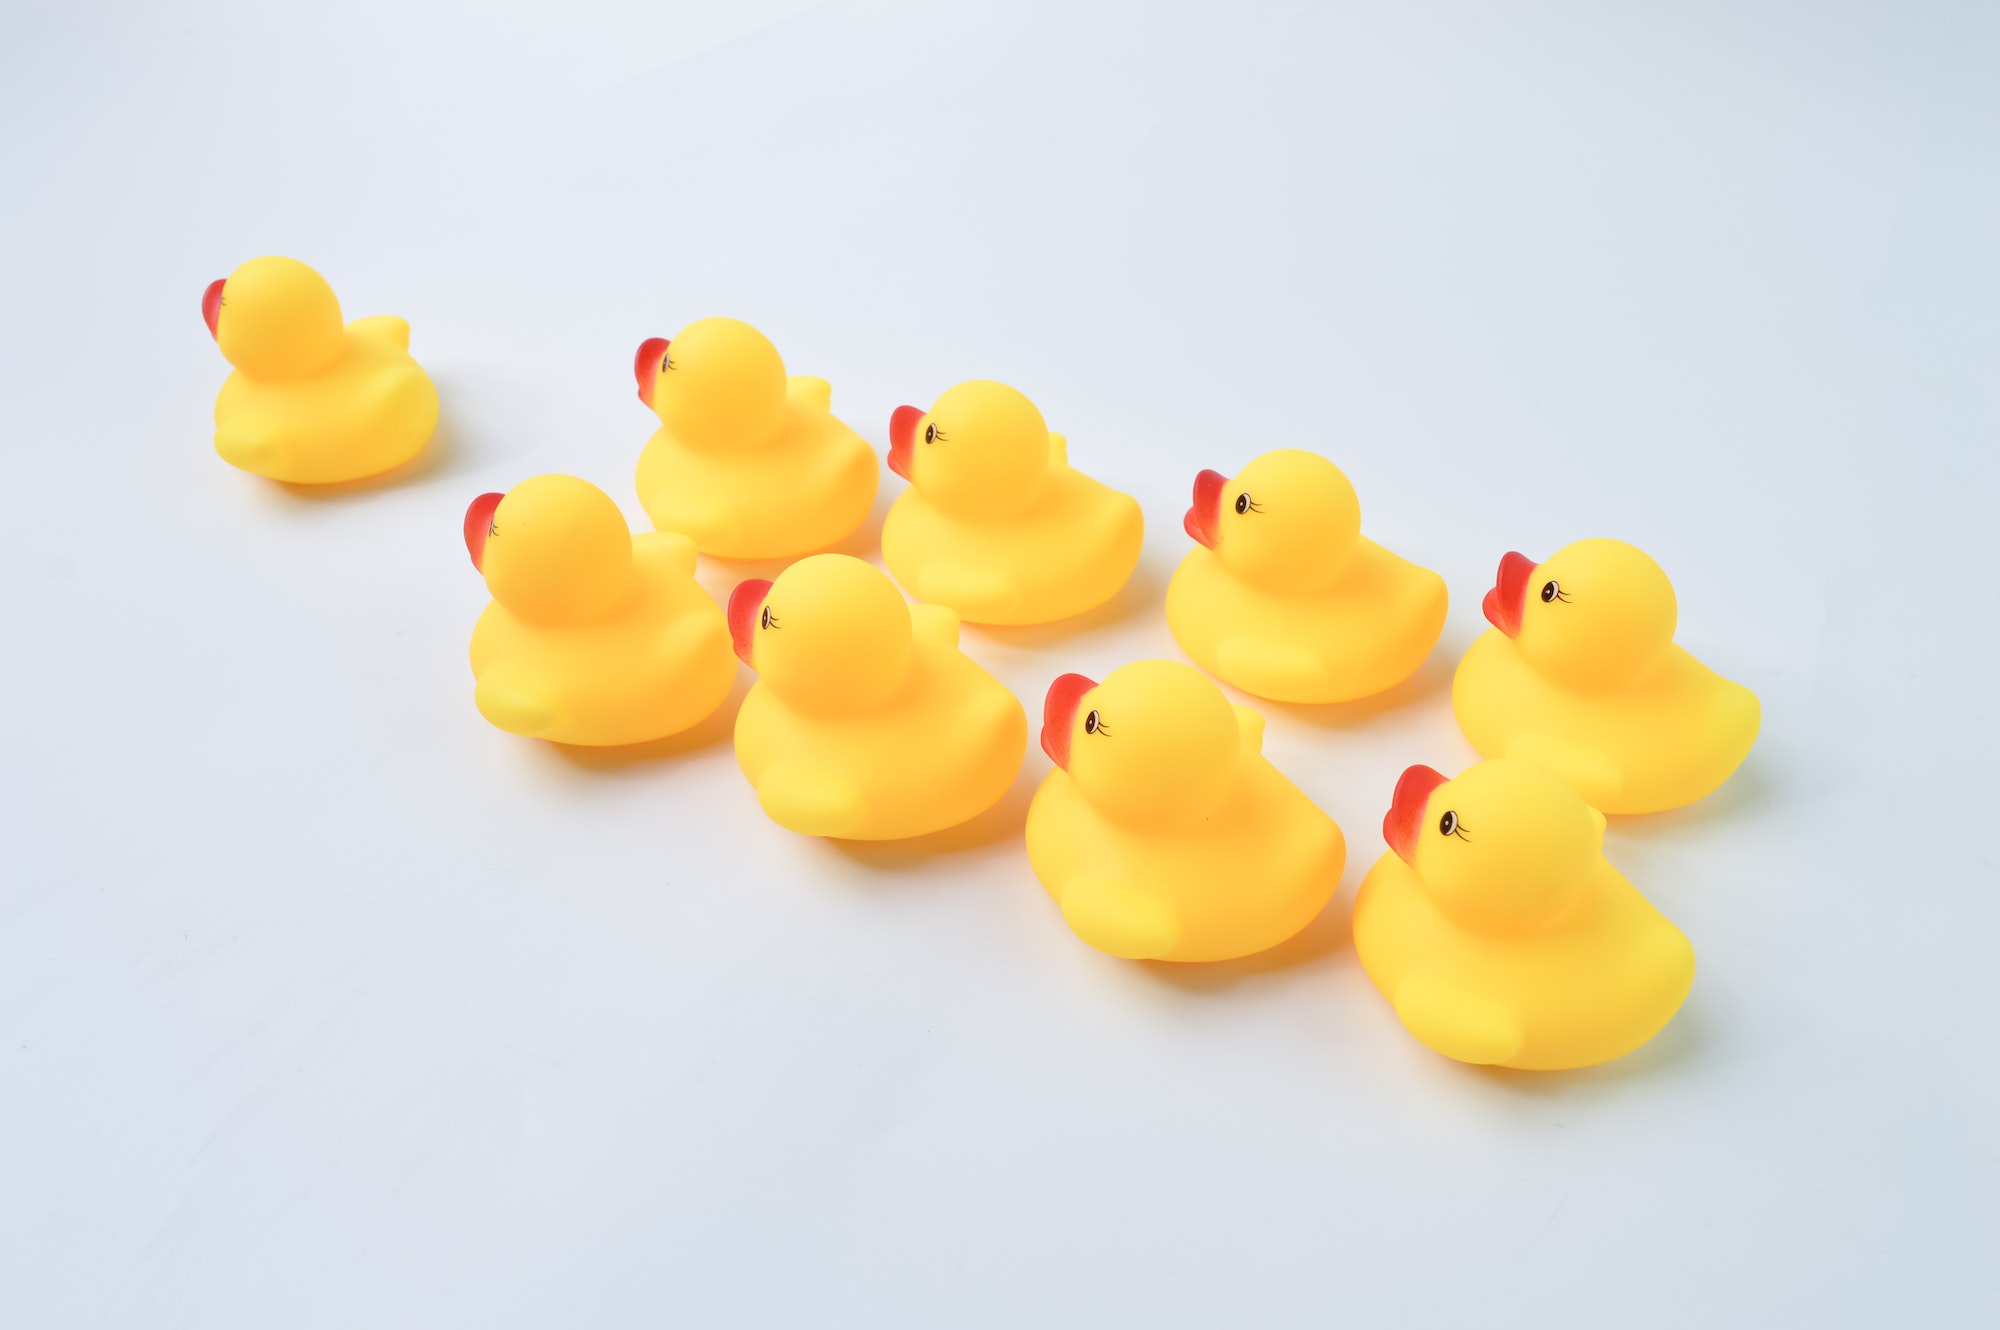 Group of toy ducks follow the leader. Teamwork and cooperation concept